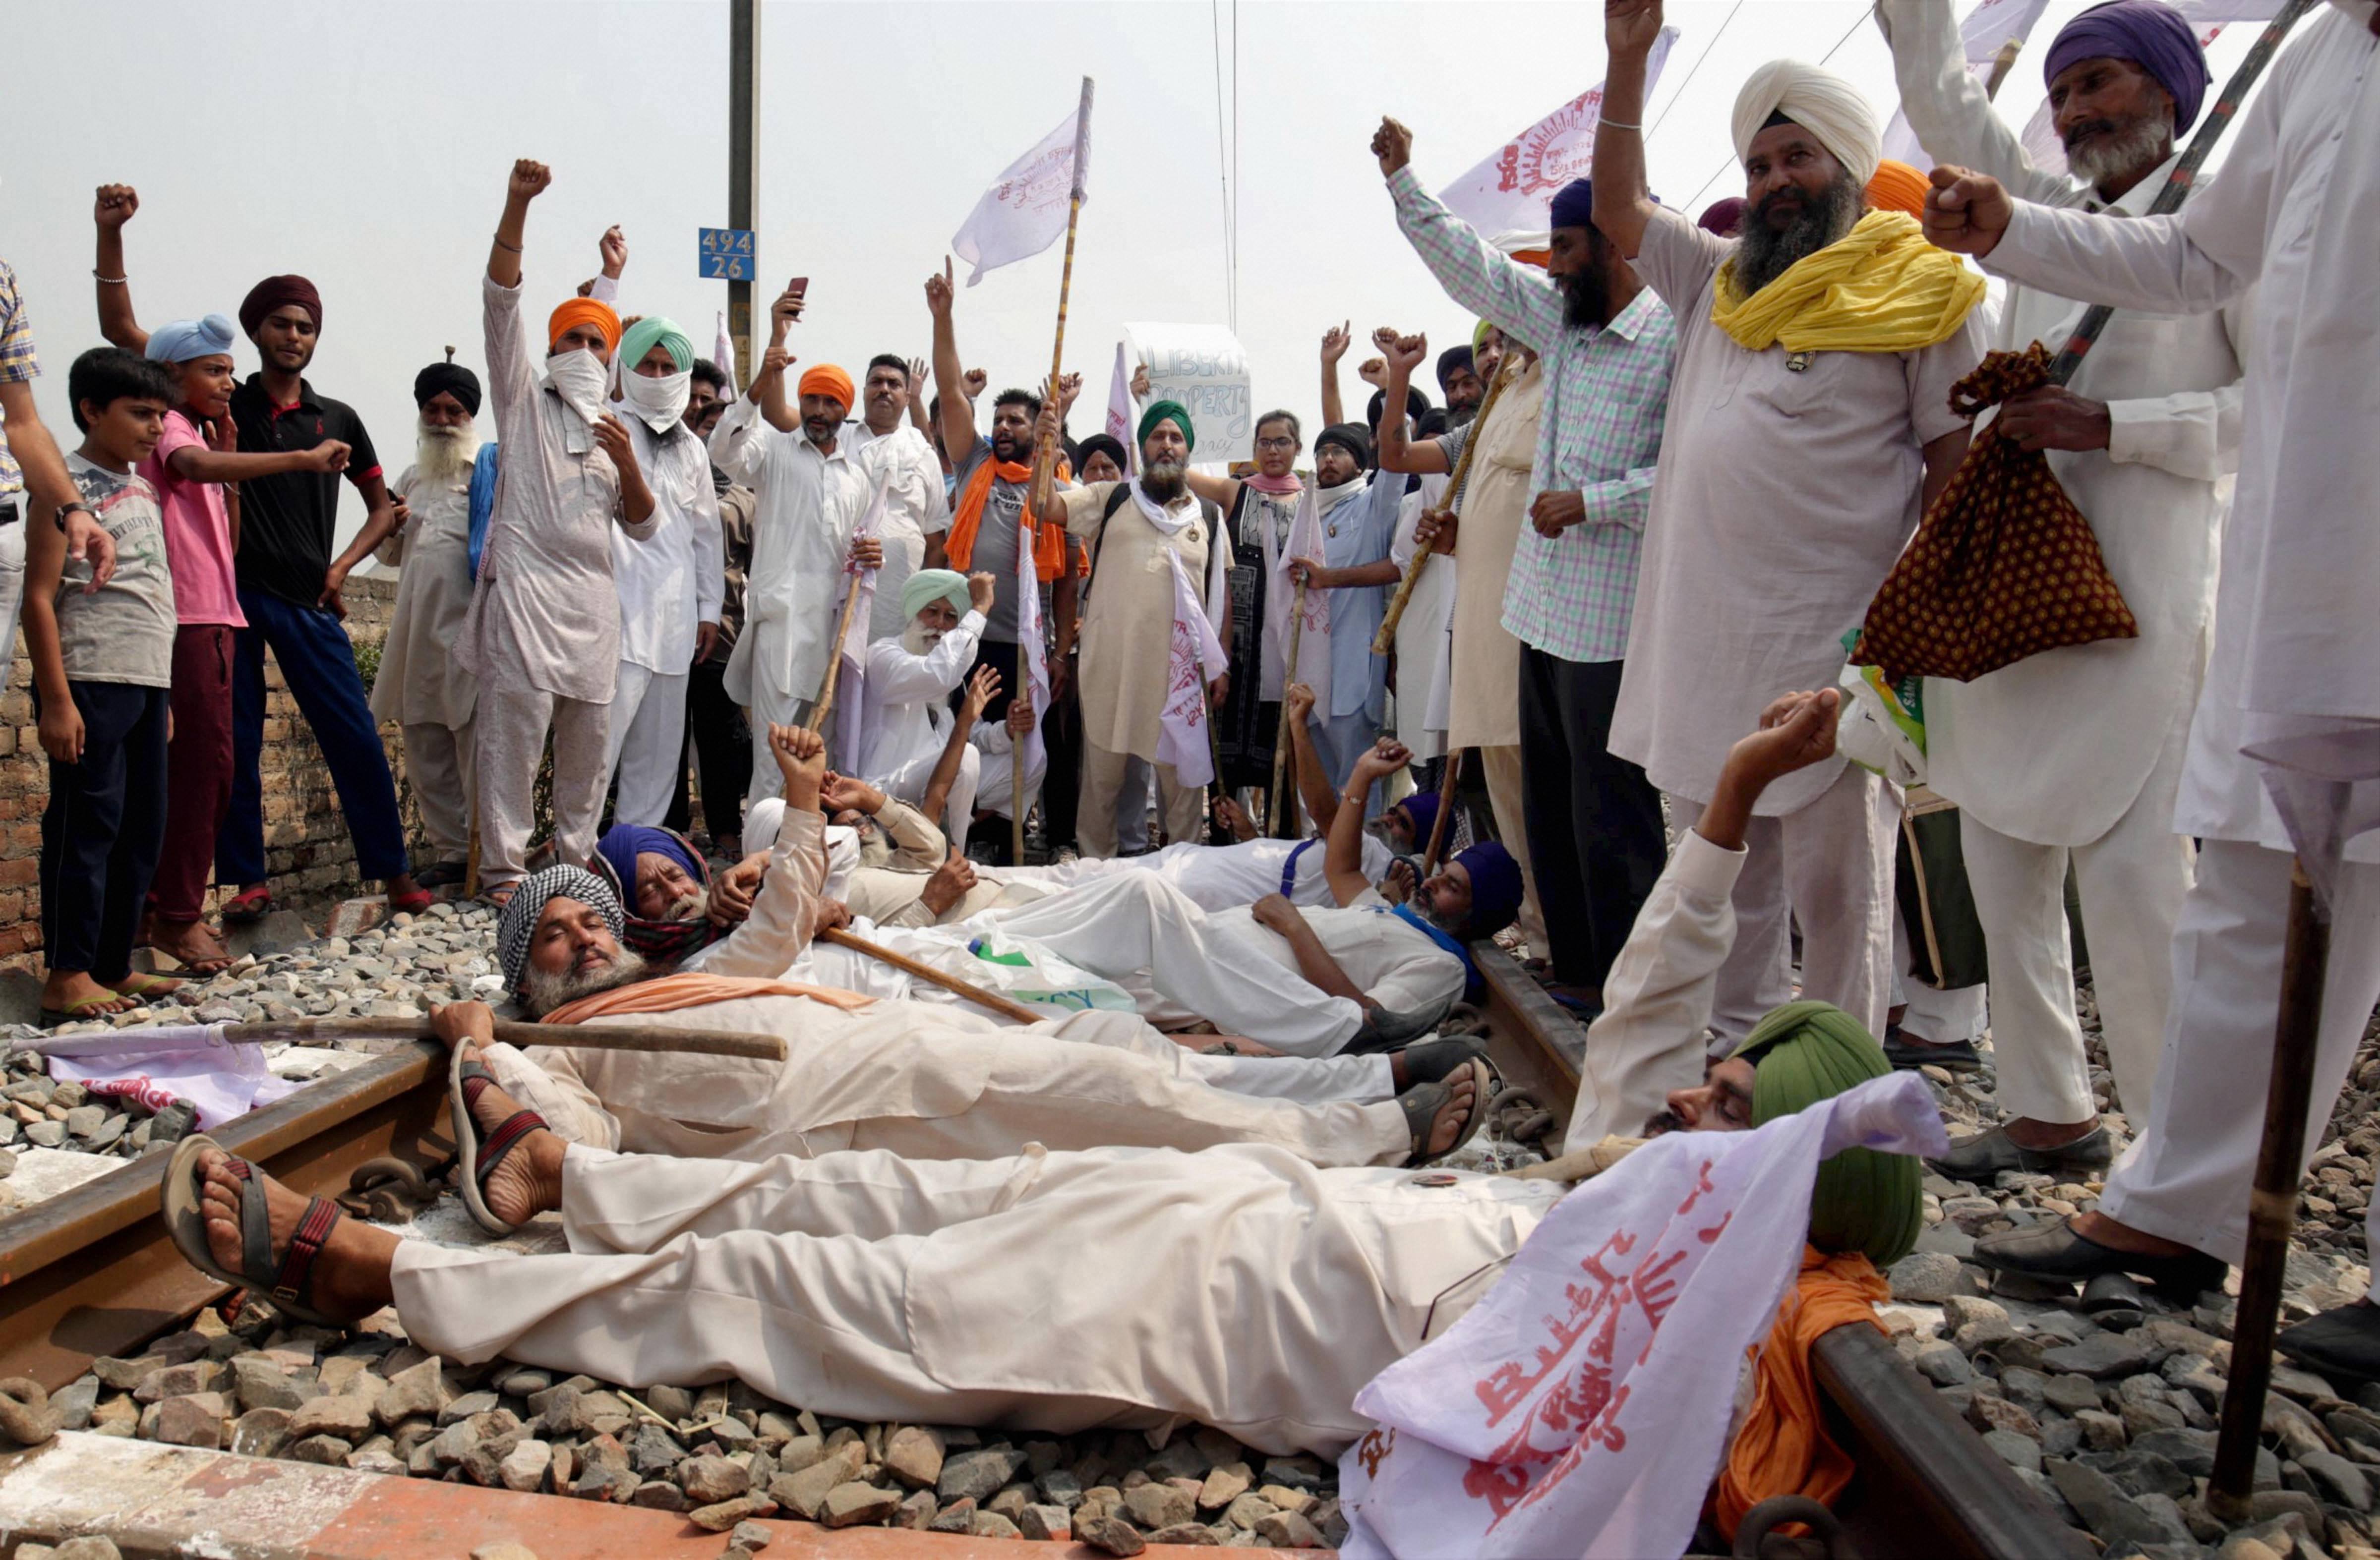 Amritsar: Farmers block a railway track as they participate in 'Rail Roko Andolan' during a protest against the farm bills passed in both the Houses of Parliament recently, at village Devi Dass Pura, about 20km from Amritsar, Thursday, Sept. 24, 2020. (PTI Photo)(PTI24-09-2020_000091B)